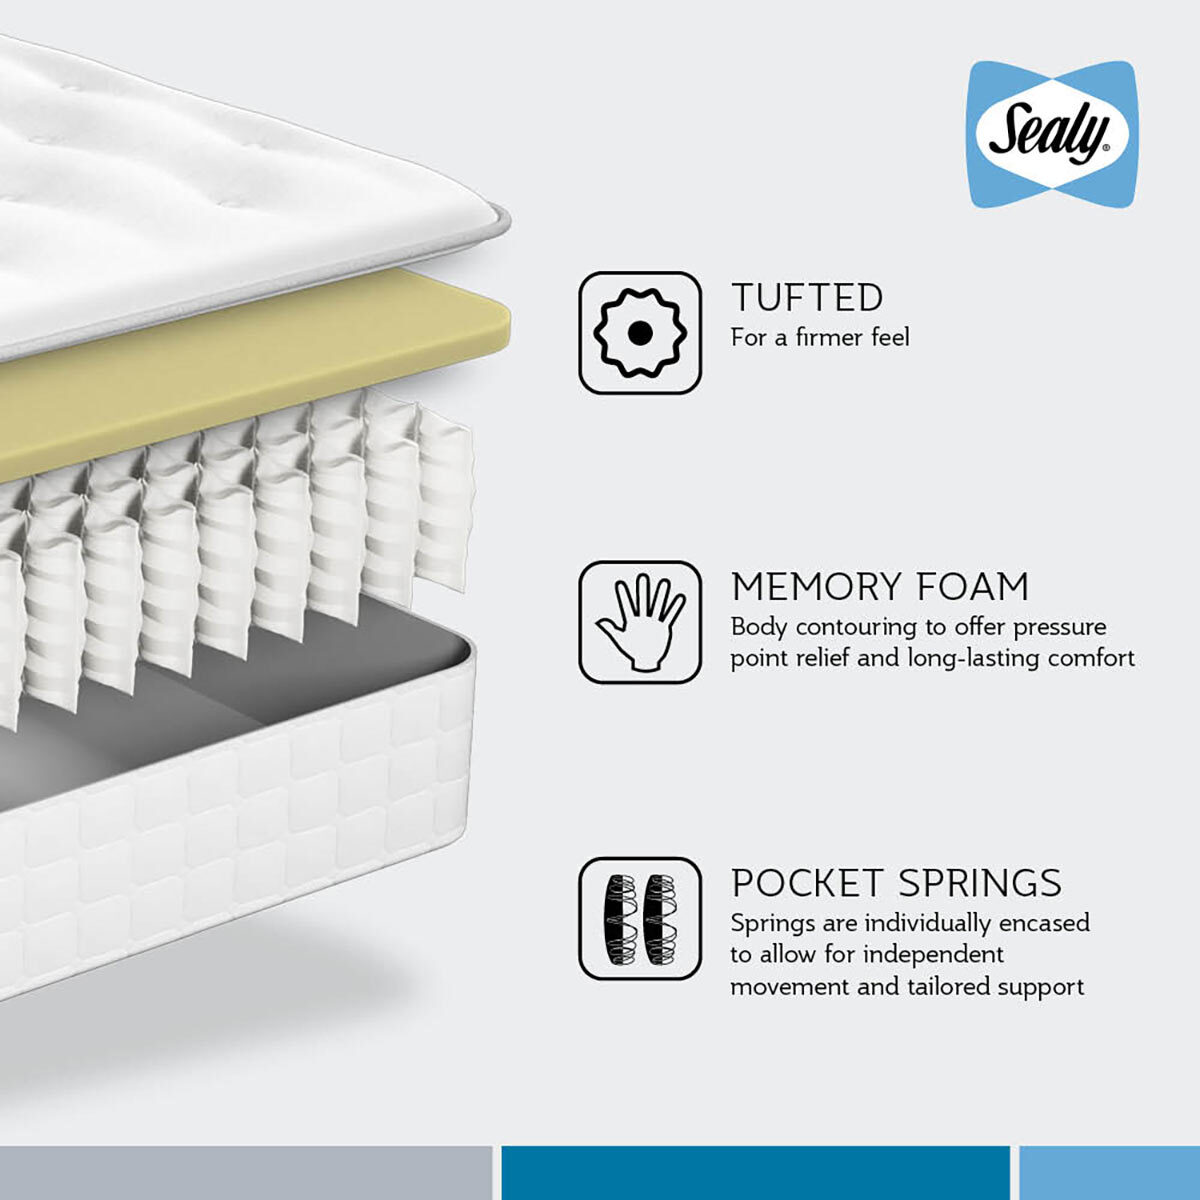 Sealy 1000 Deluxe Pocket Memory Tufted Mattress, Single